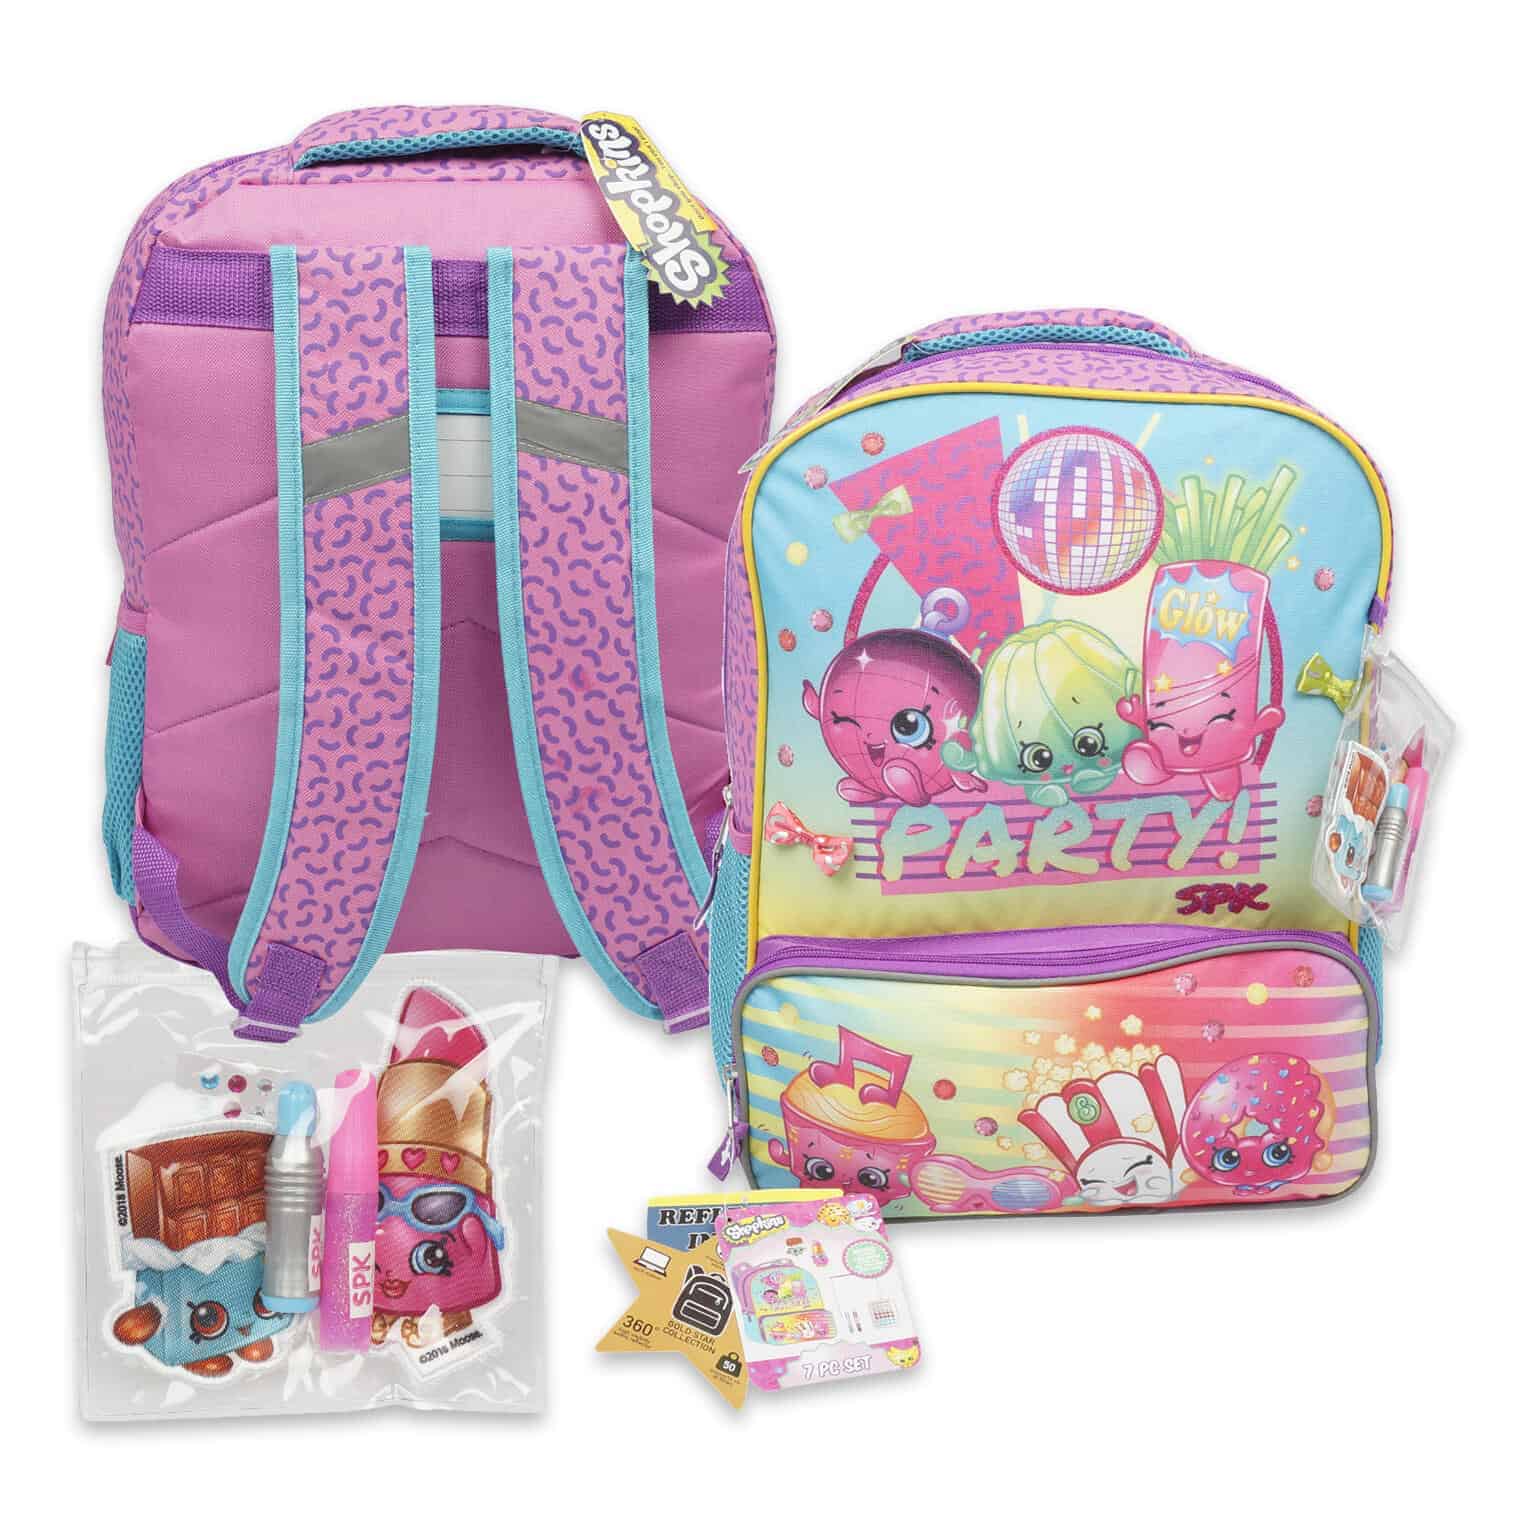 This Shopkins Backpack 7 Piece Set 16 inch (41cm) is made with love by Premier Homegoods! Shop more unique gift ideas today with Spots Initiatives, the best way to support creators.